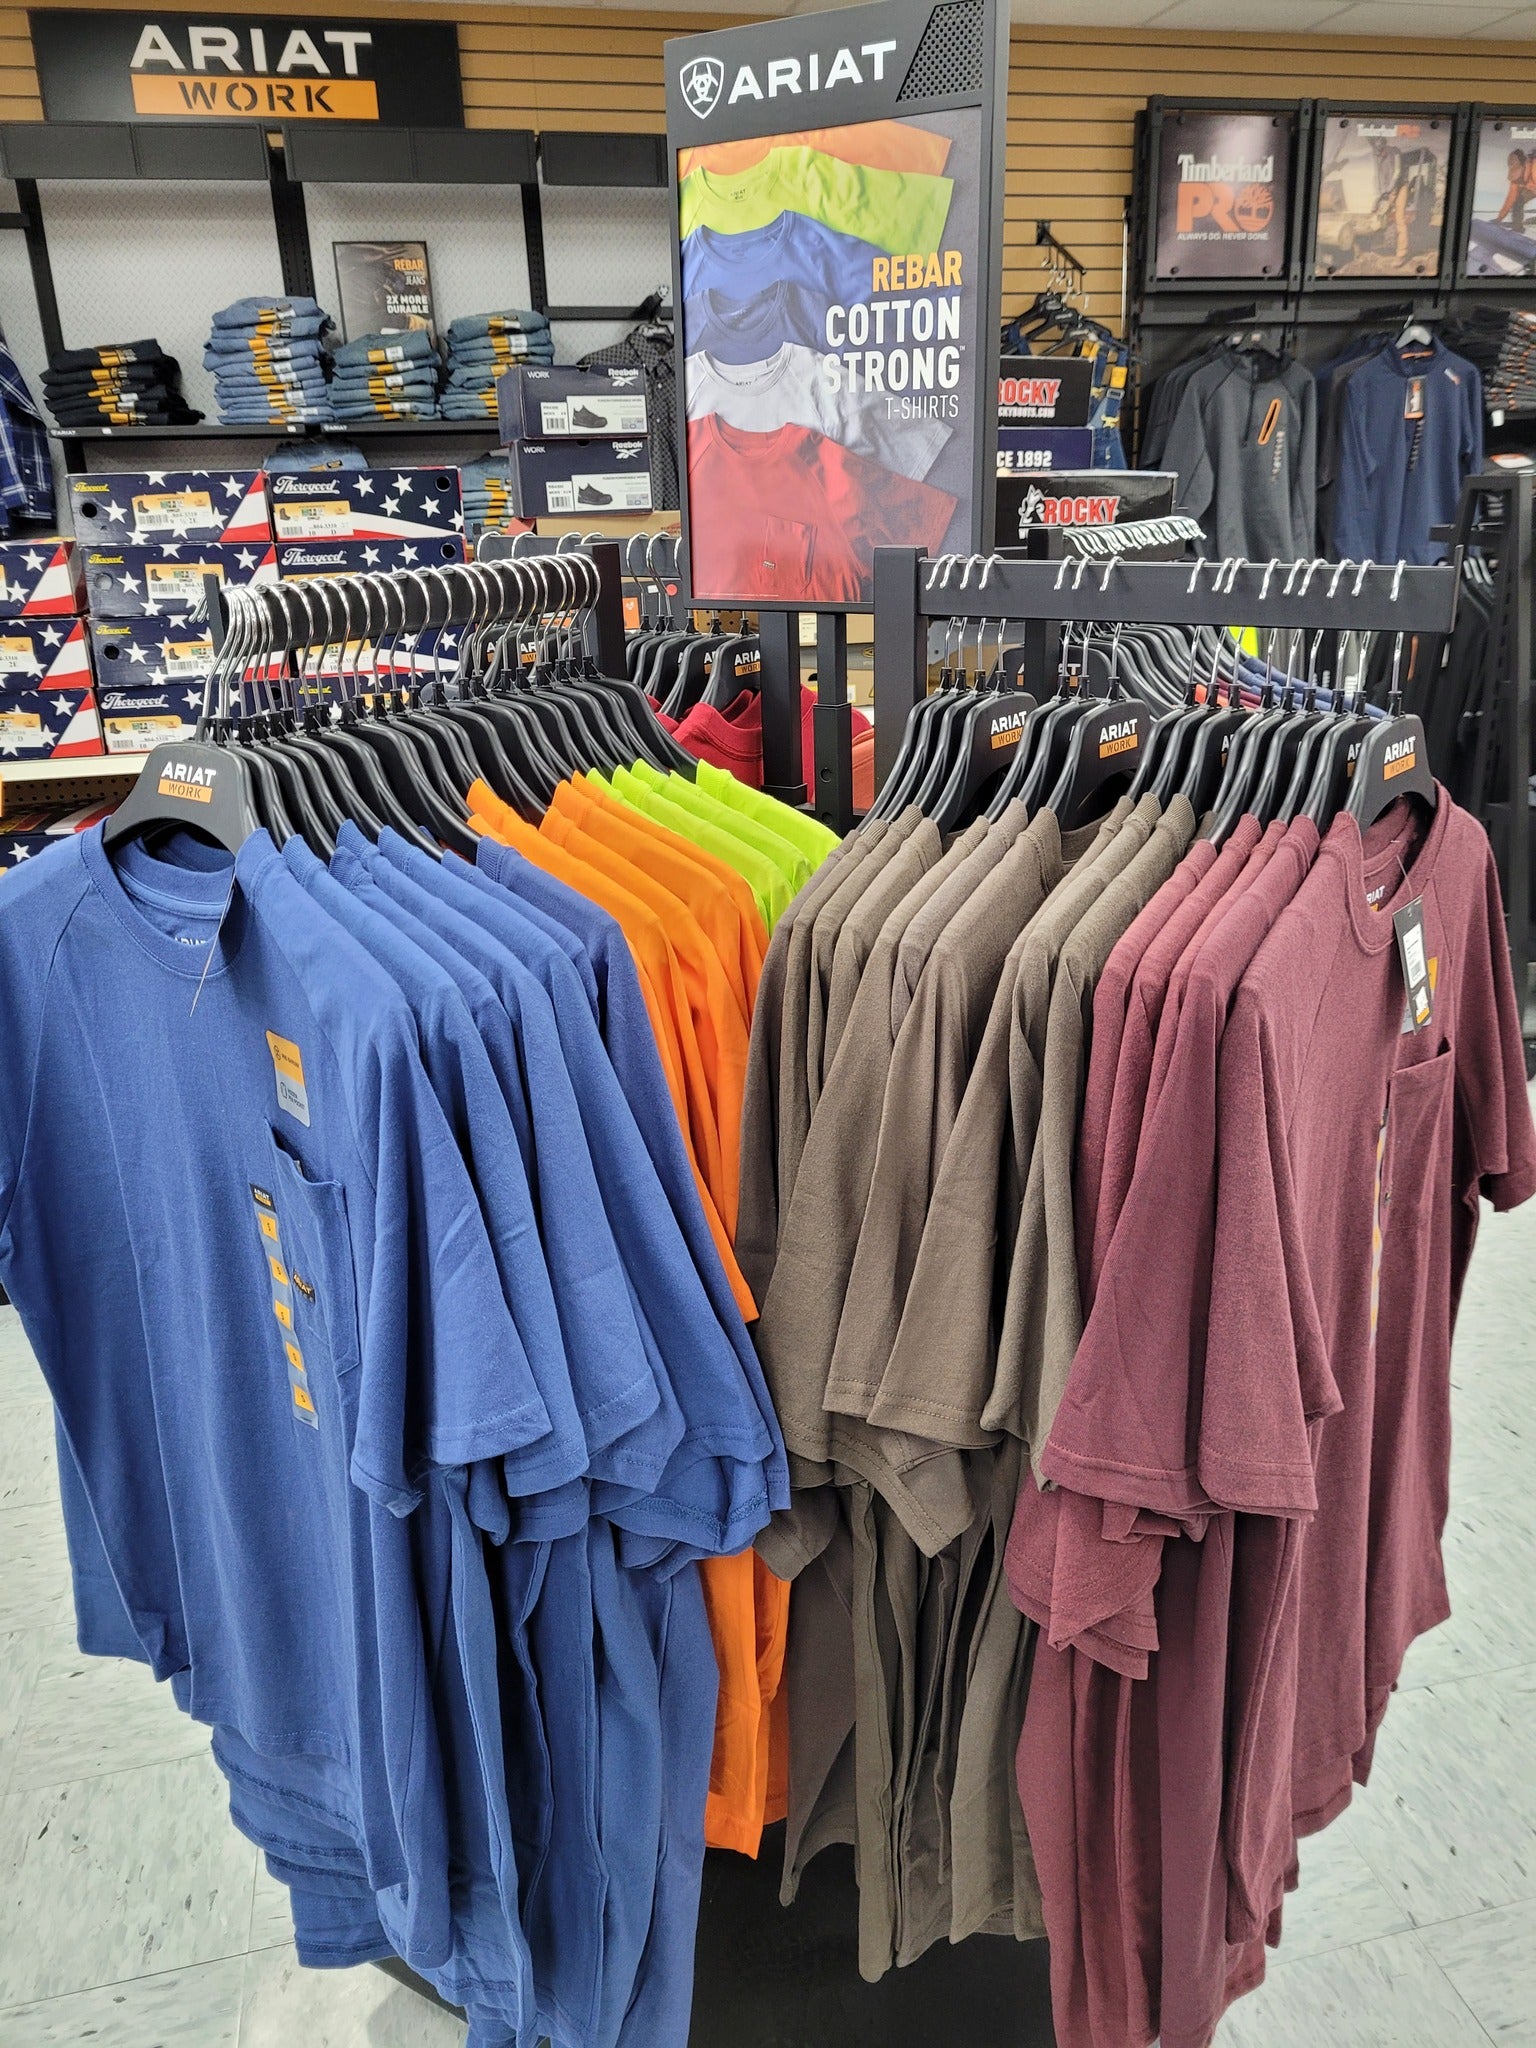 Clothes on racks at Posey County Workwear